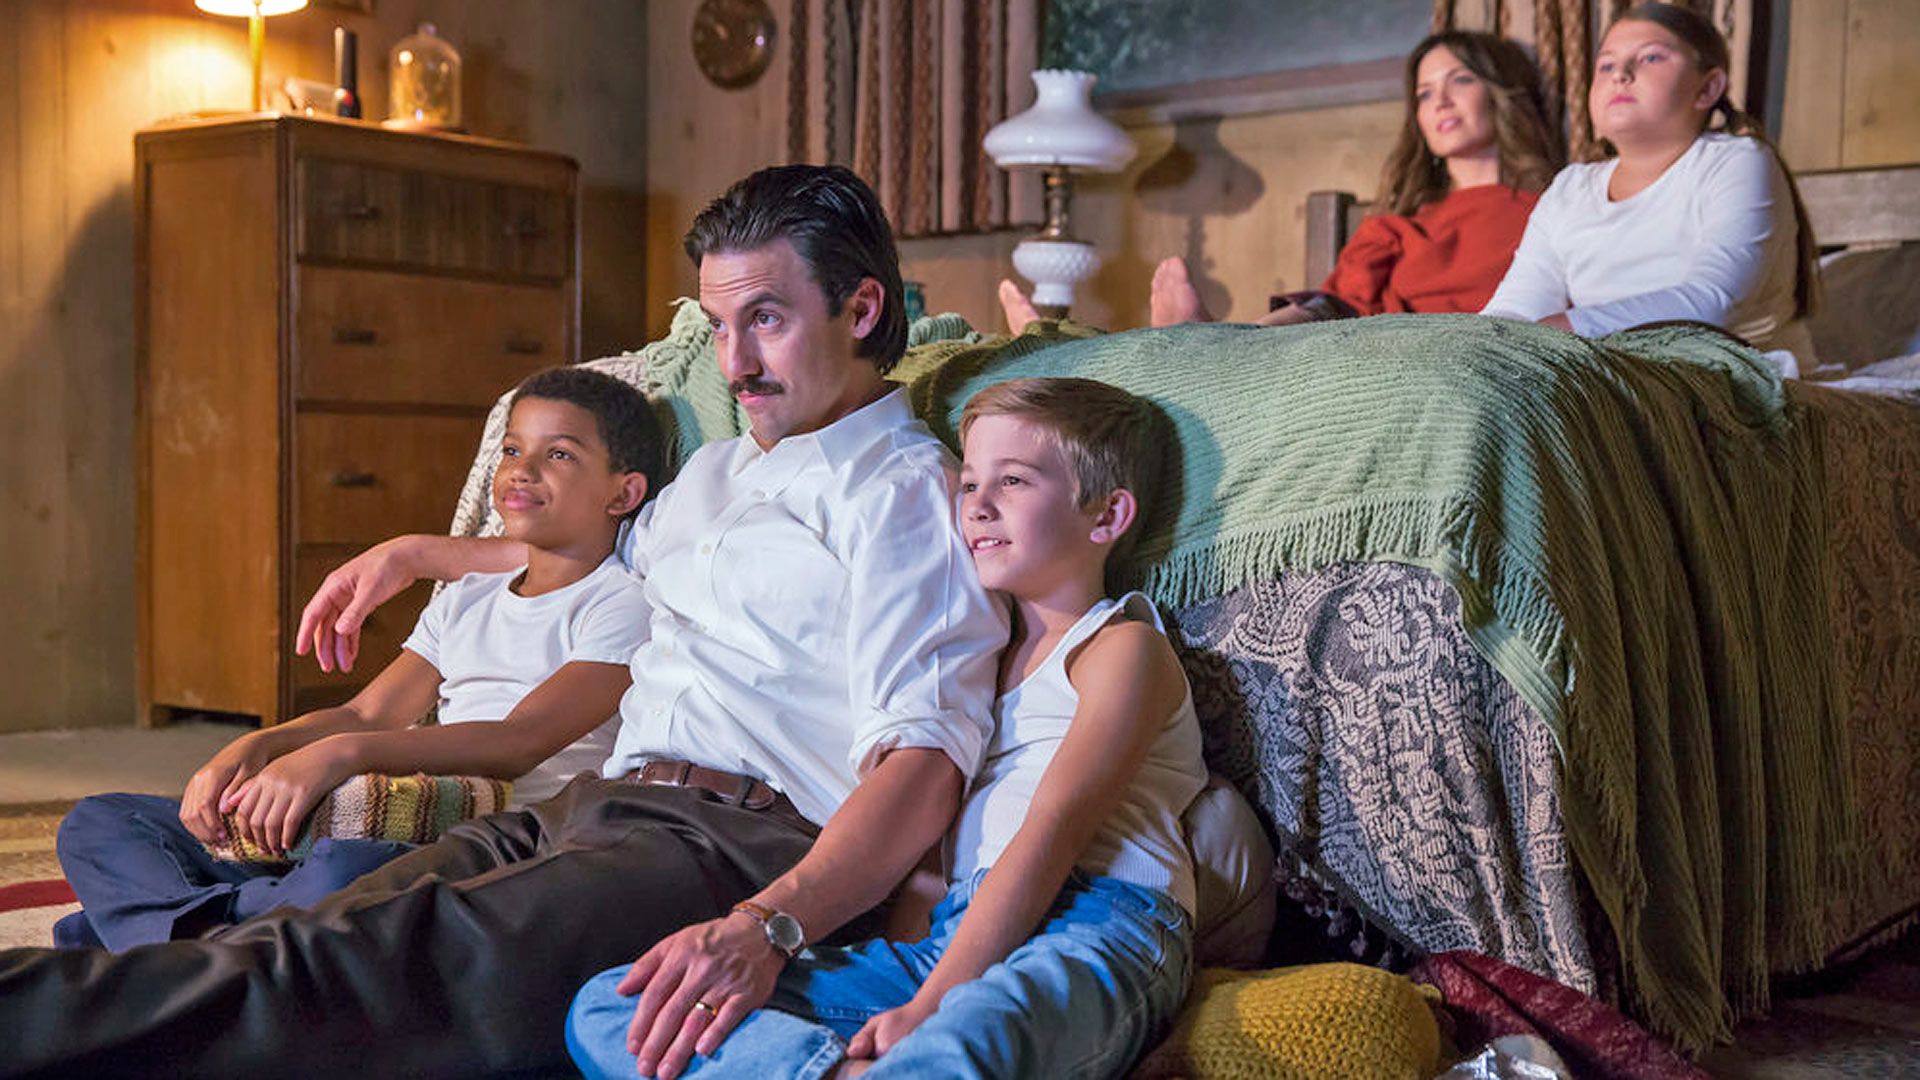 Mandy Moore and Milo Ventimiglia in "This Is Us"